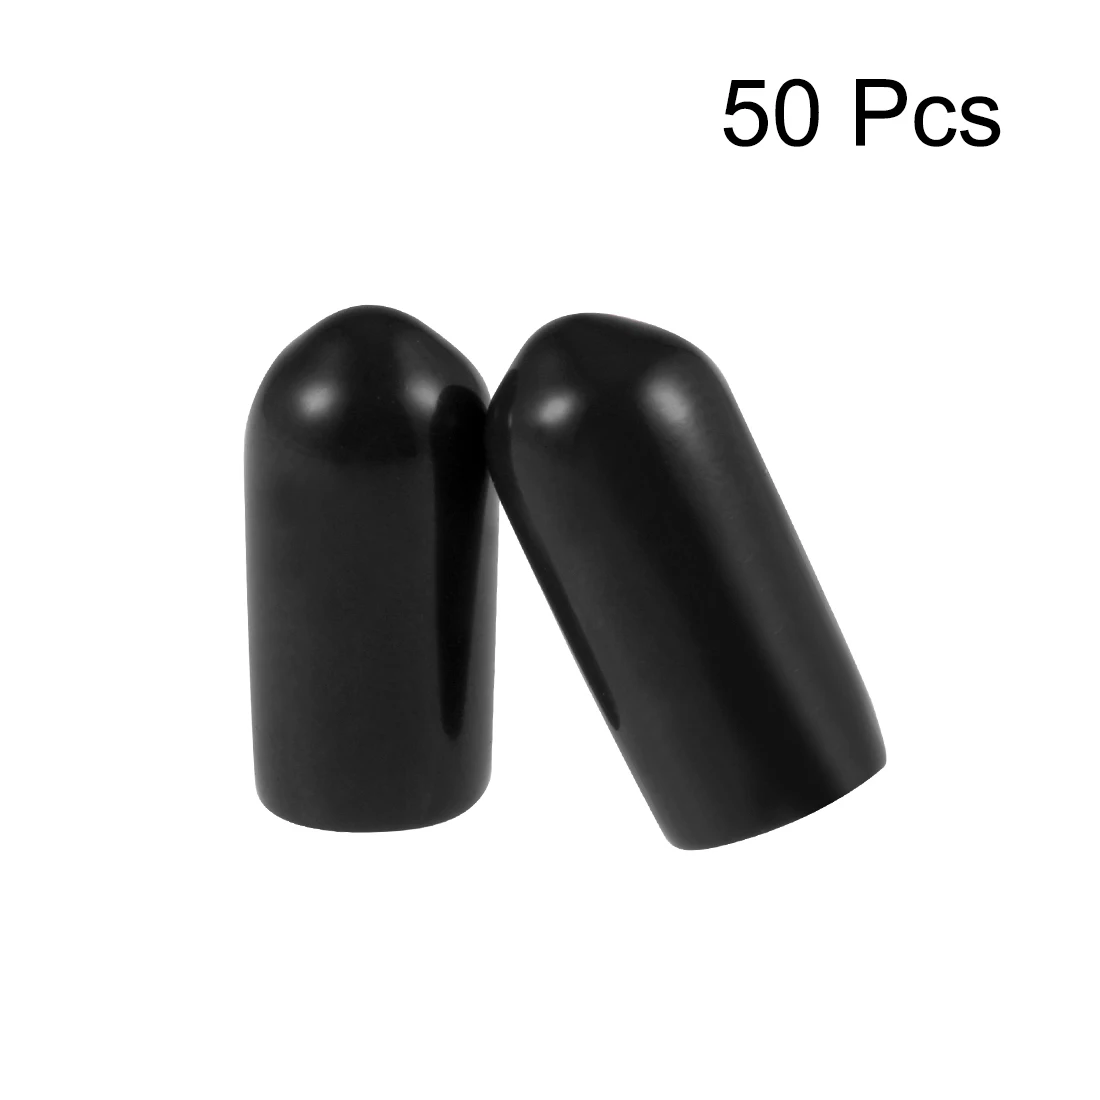 rubber bolt thread covers